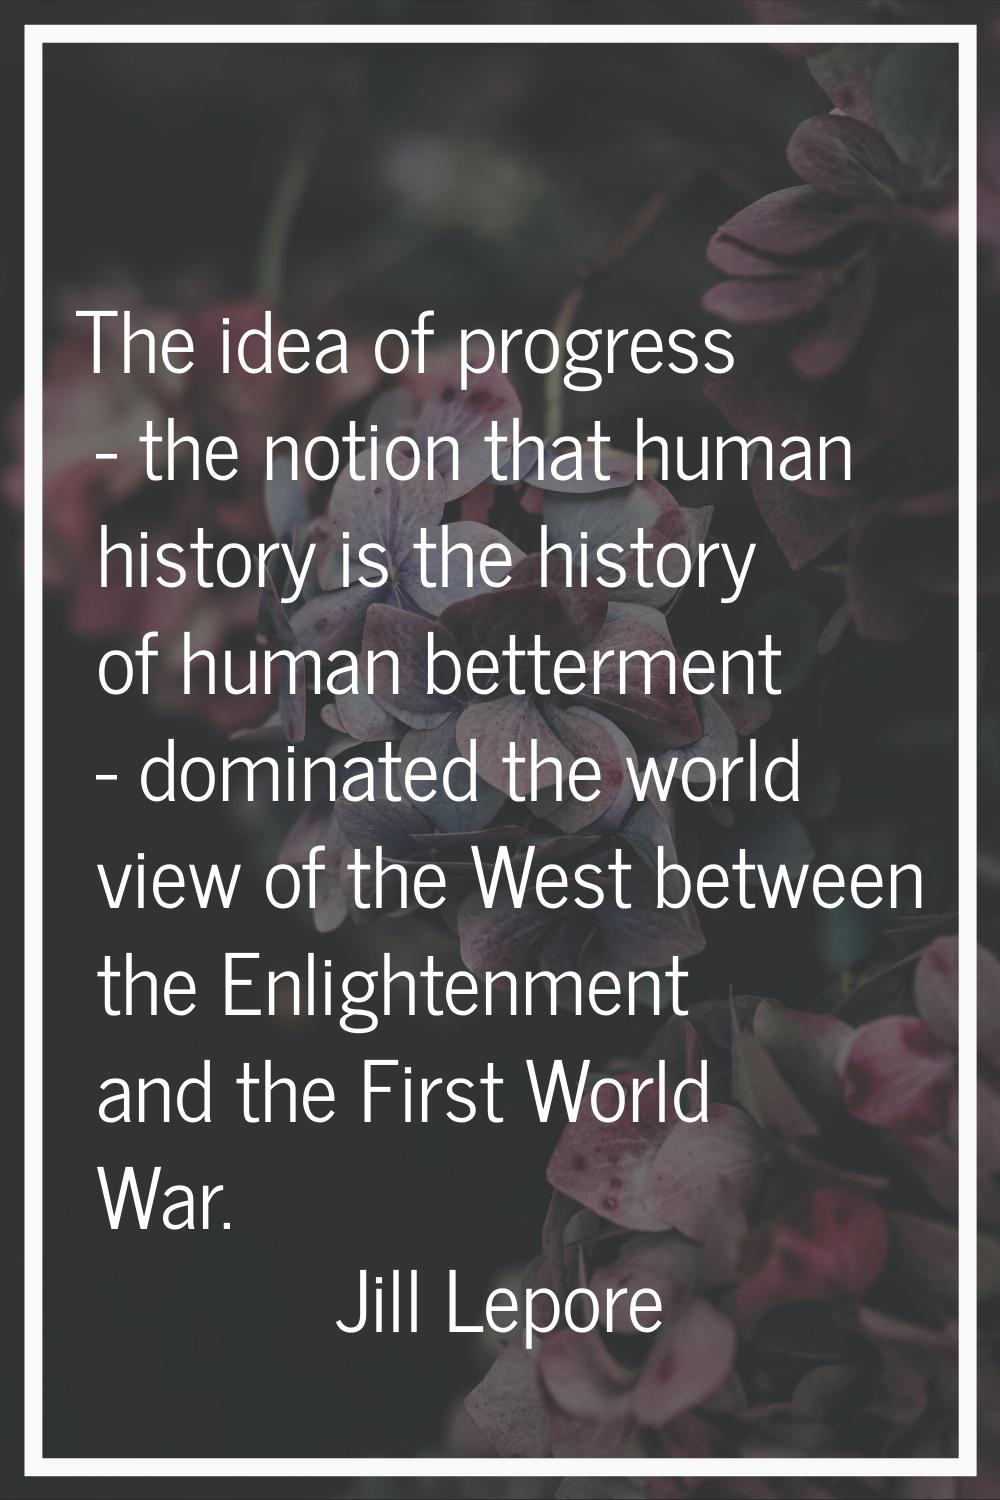 The idea of progress - the notion that human history is the history of human betterment - dominated